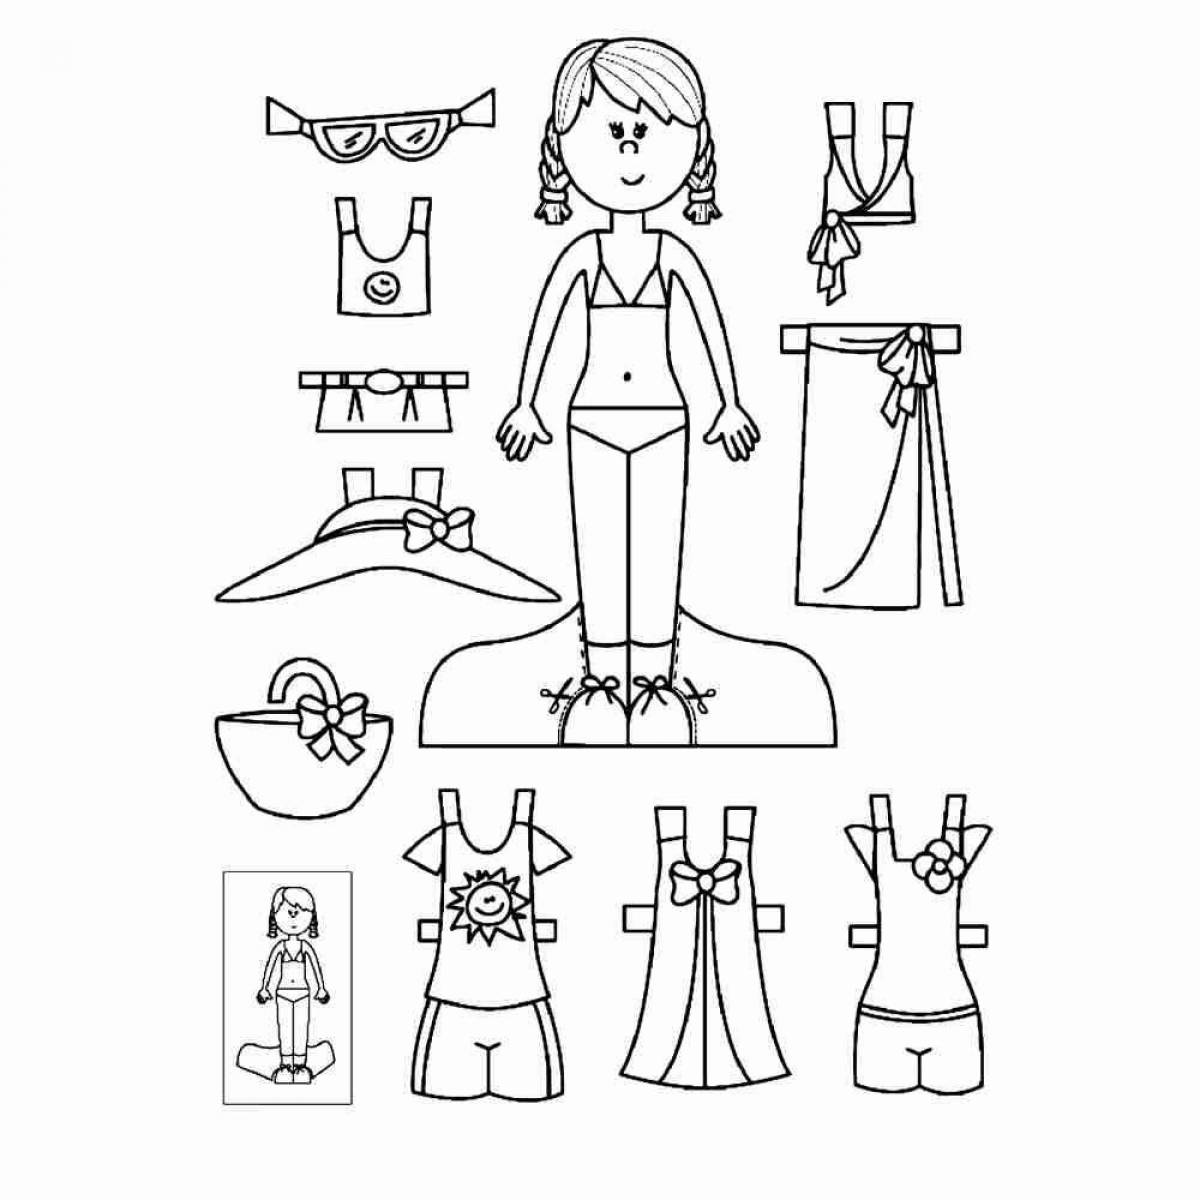 Adorable paper doll coloring book